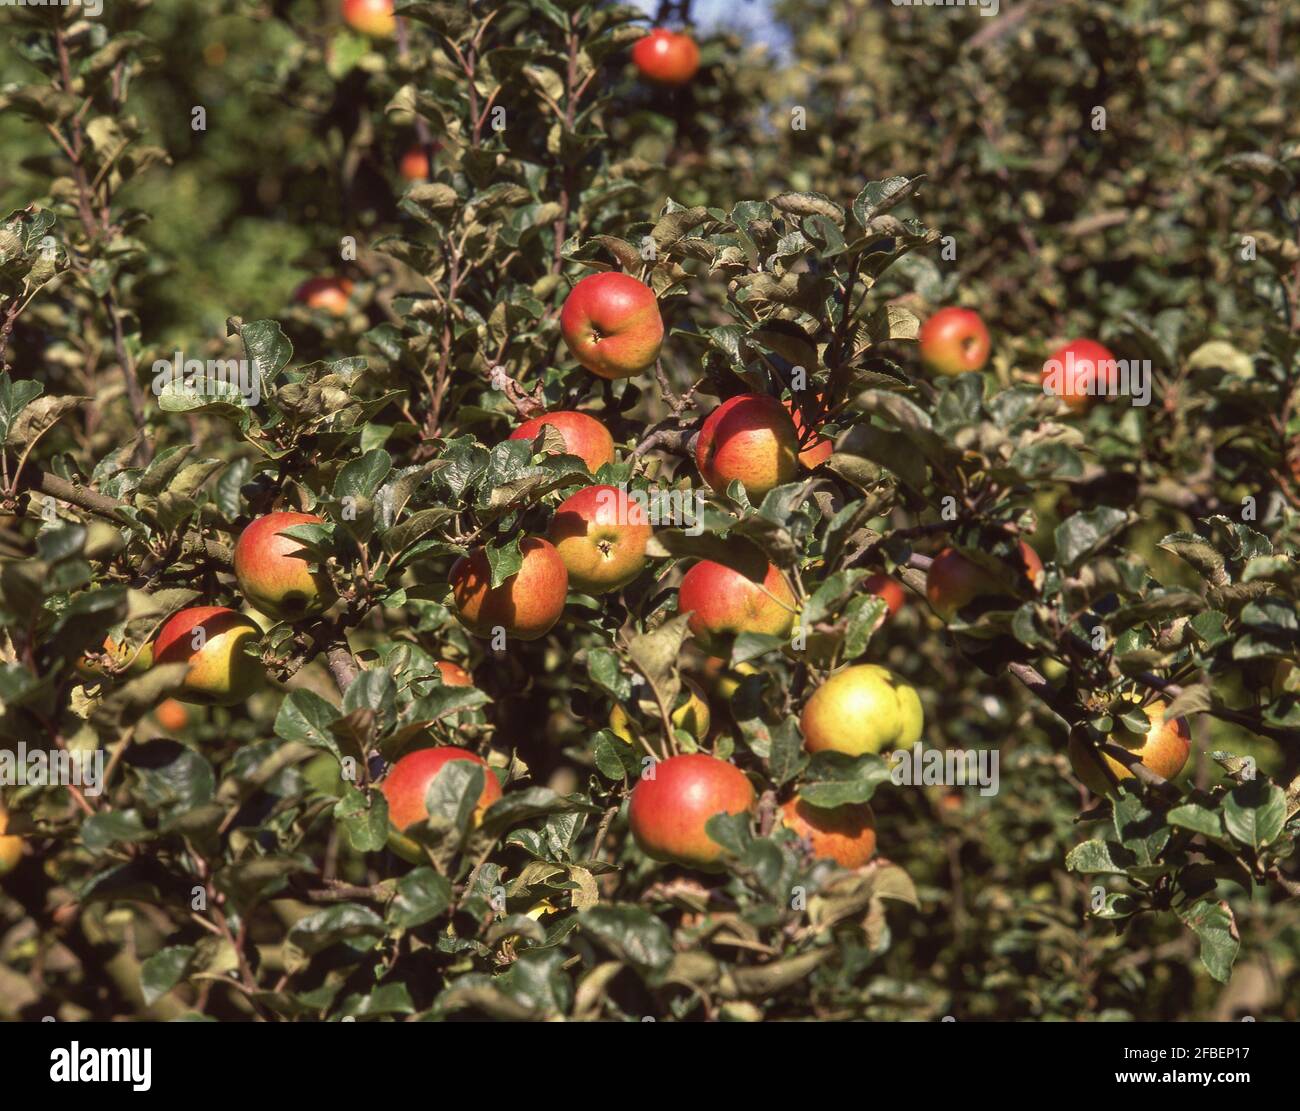 Ripe apples on tree in orchard, Kent, England, United Kingdom Stock Photo